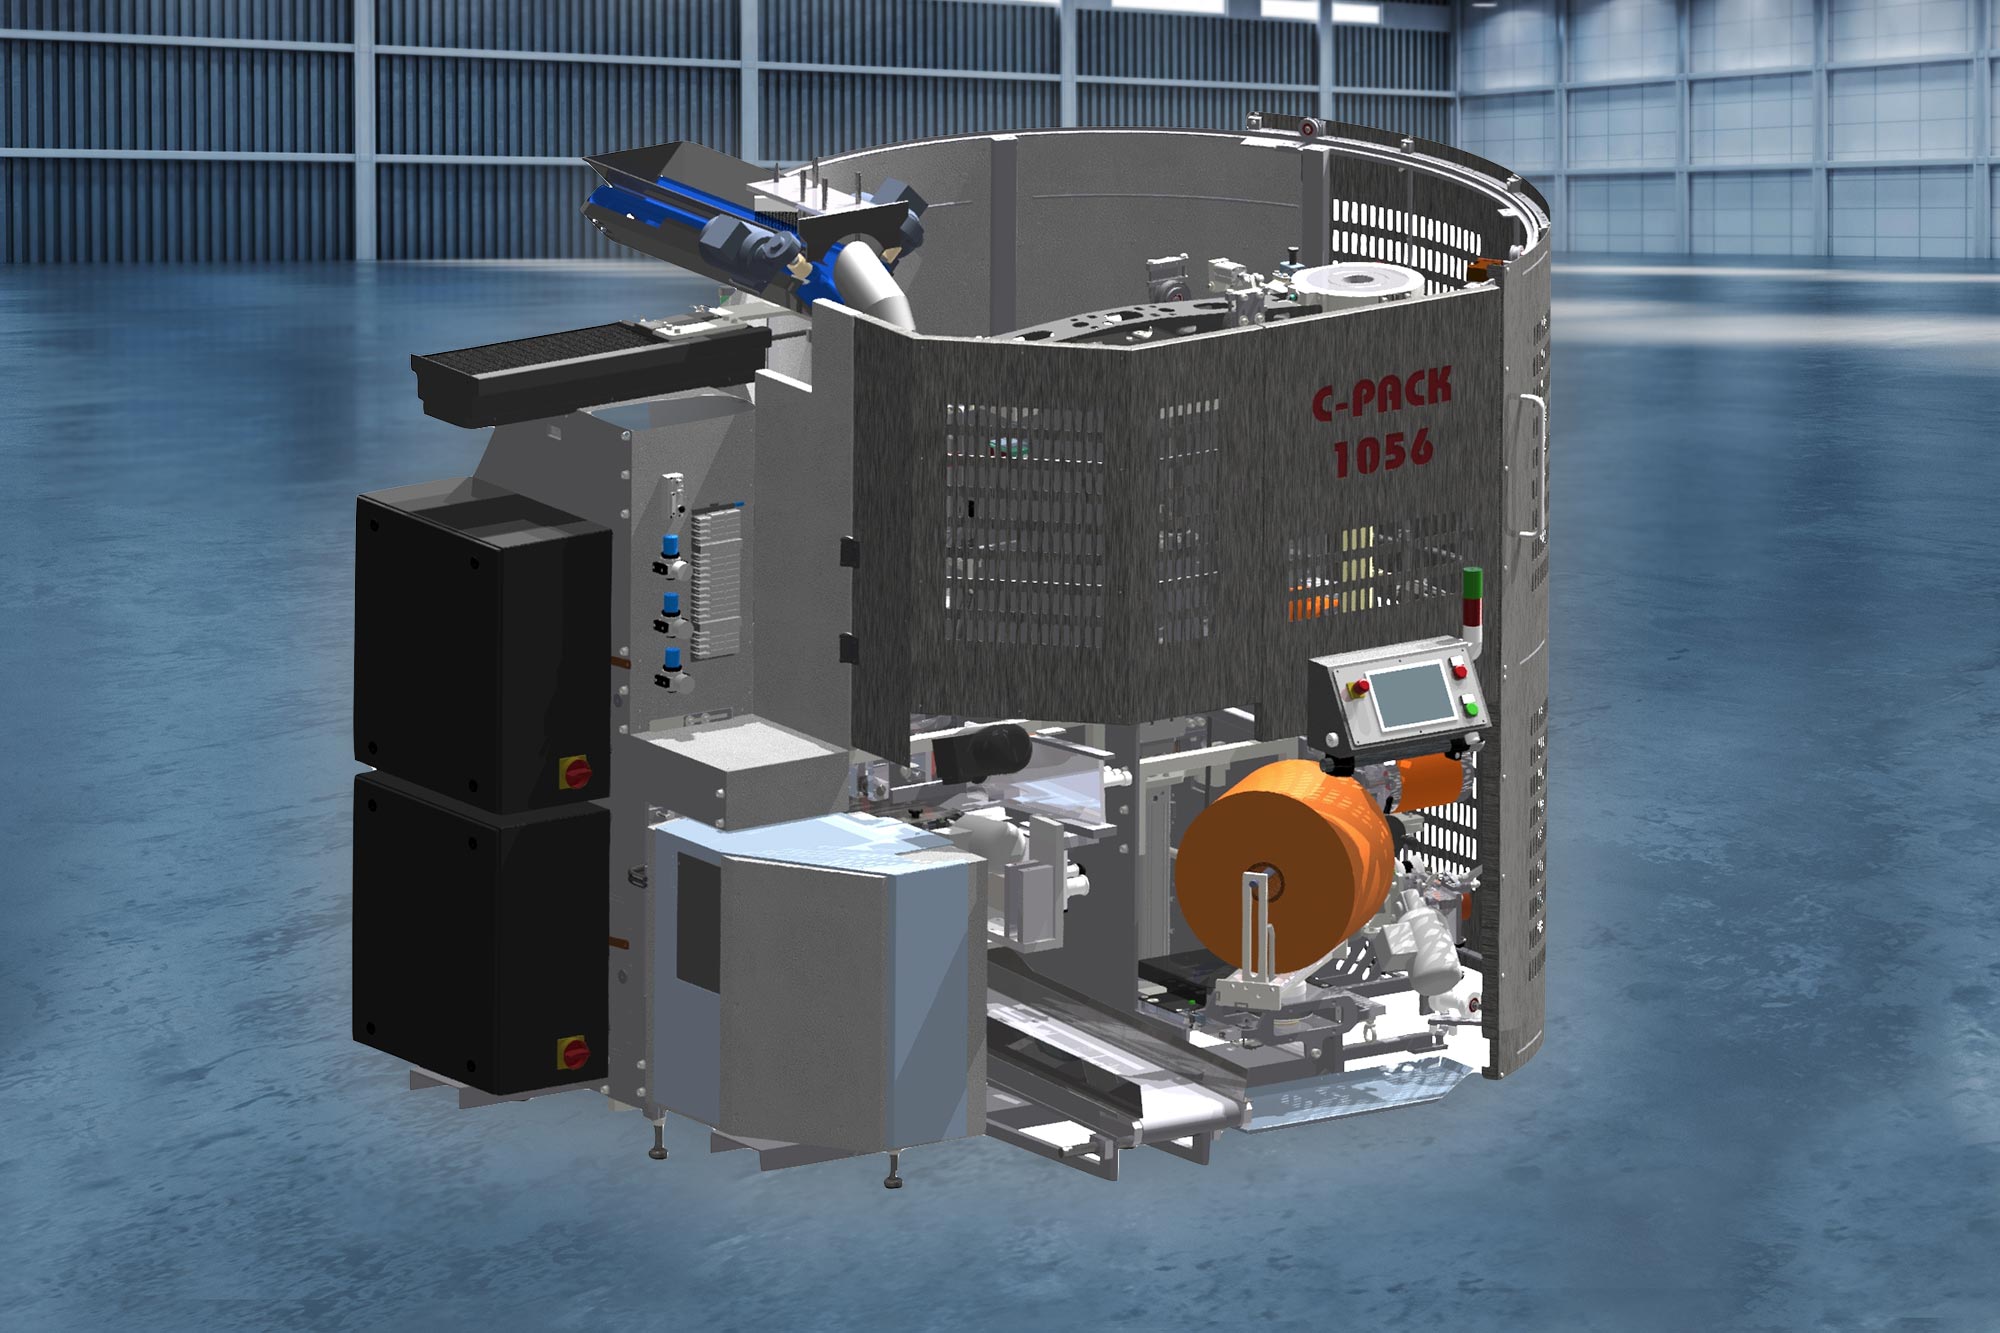 New Net-Packaging-Machine from C-PACK